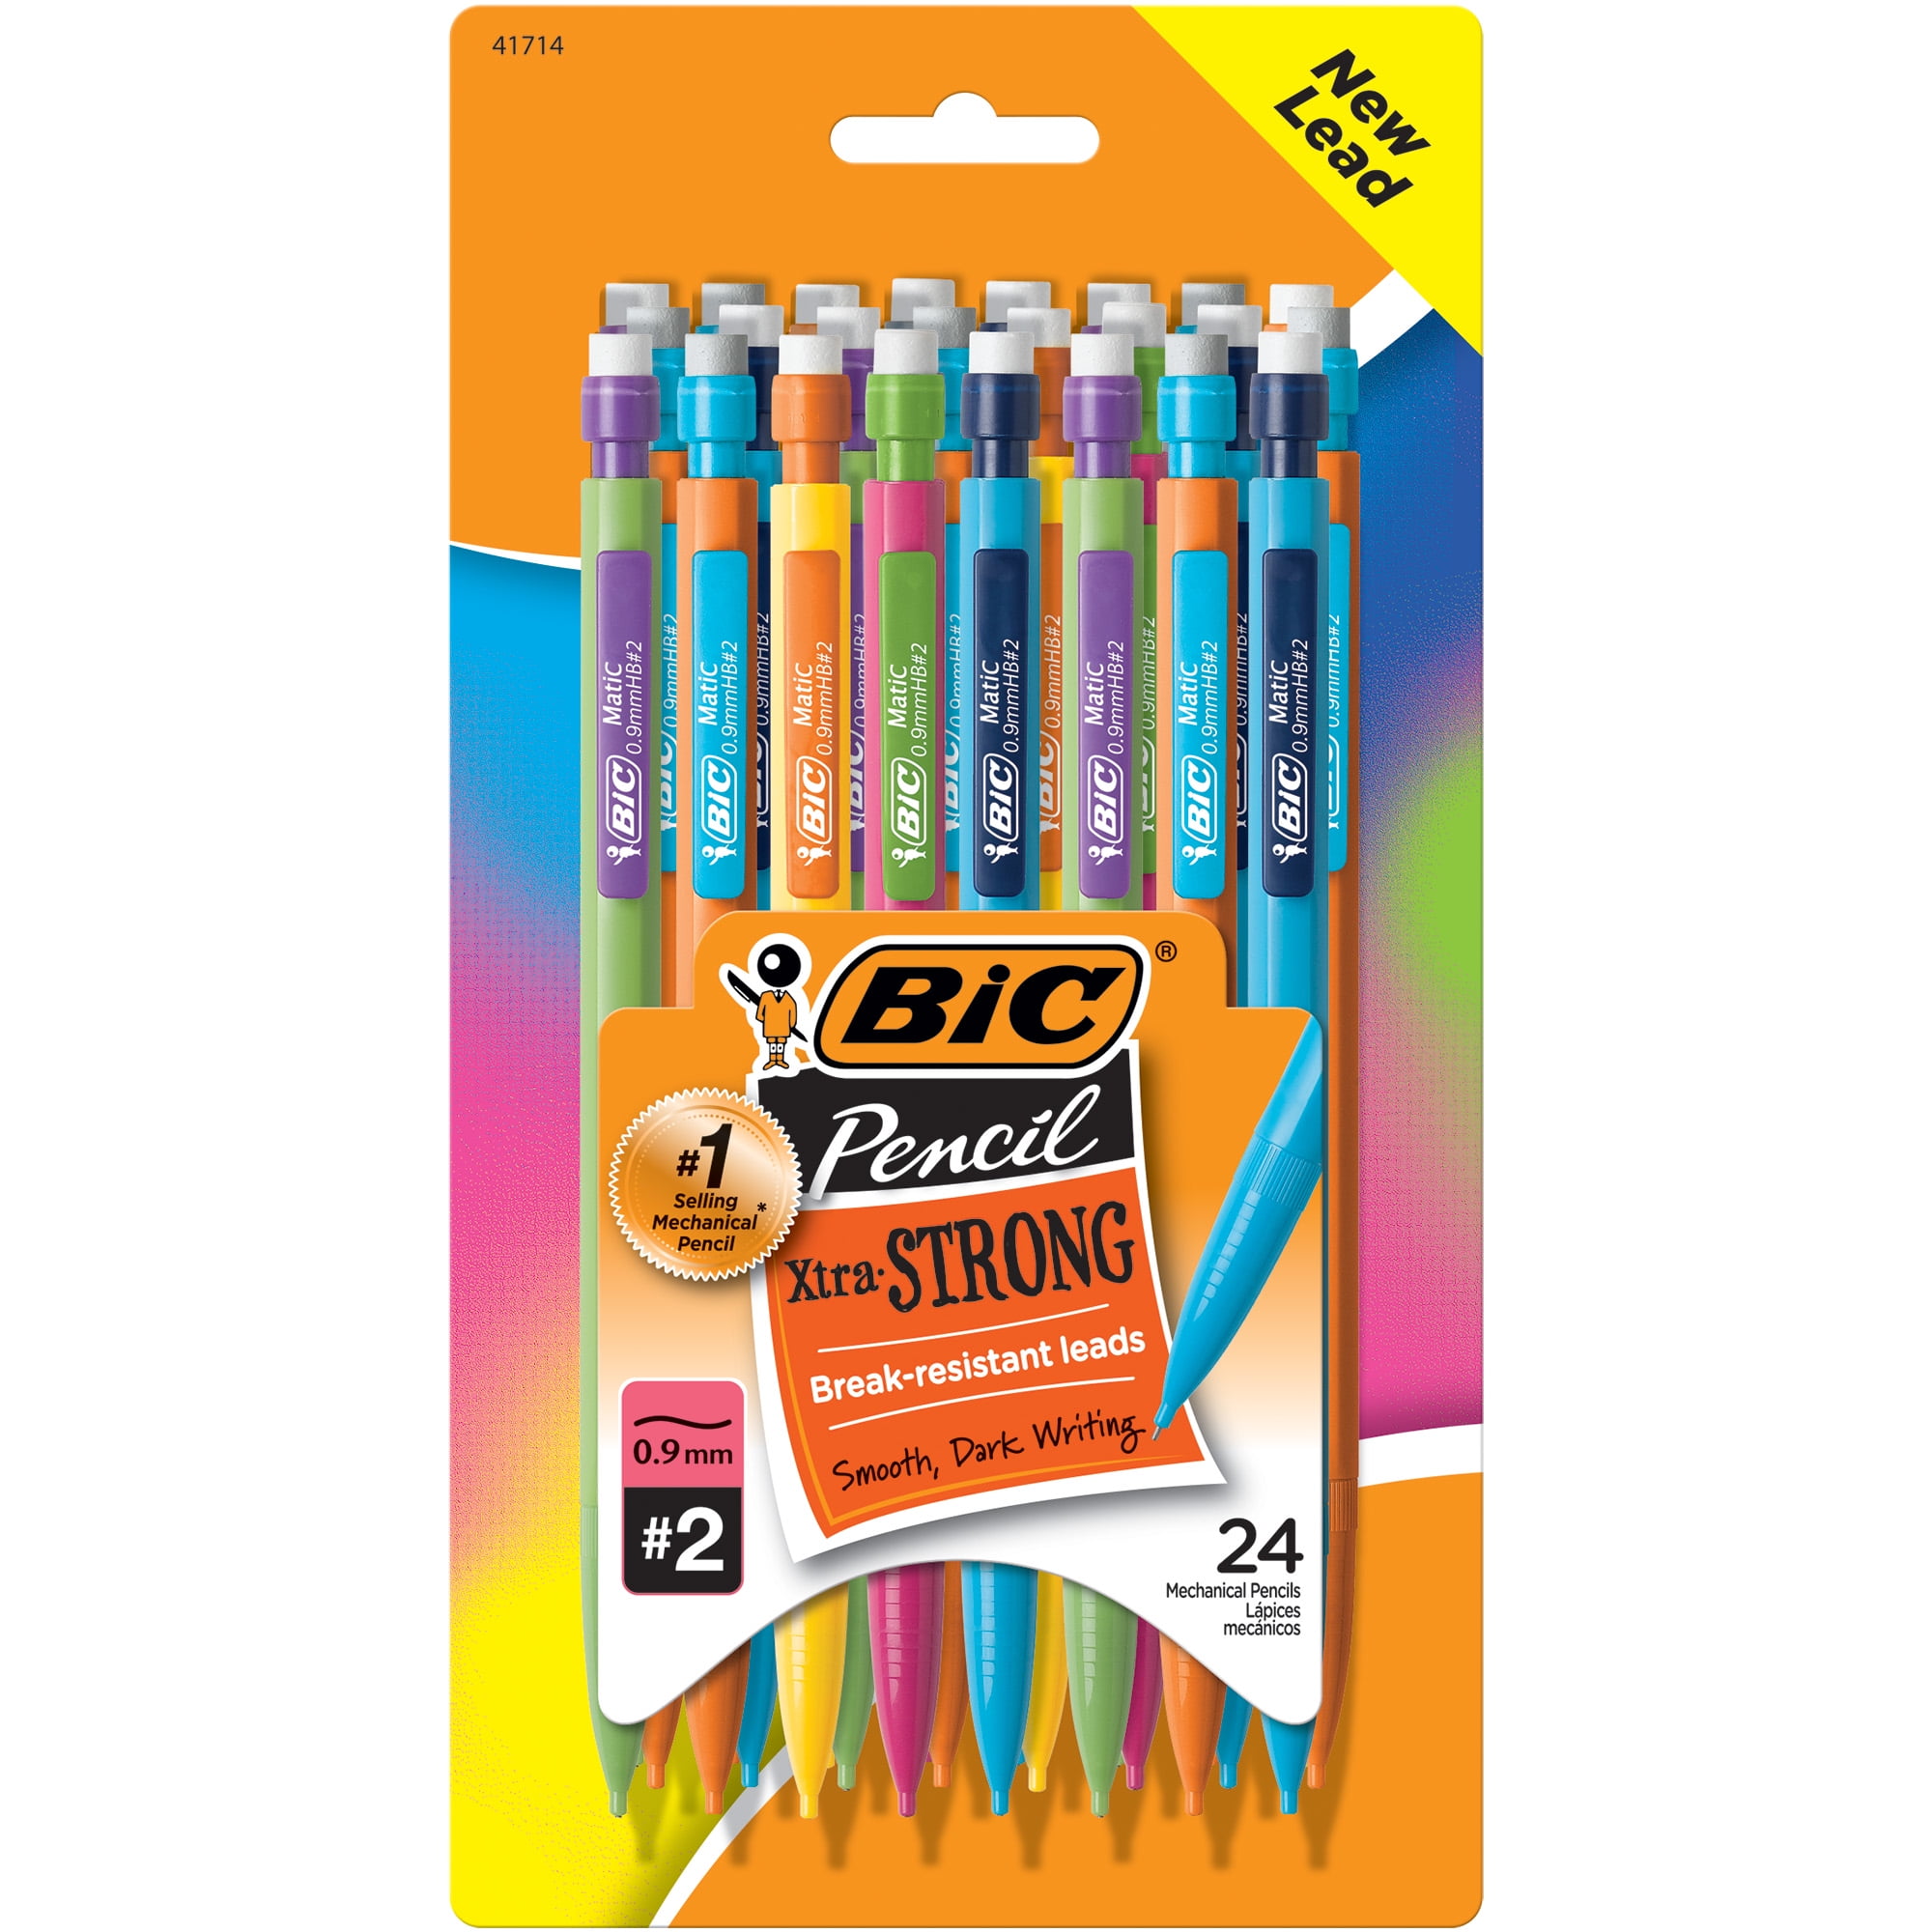 Lot of 30 Bic Xtra-Strong Mechanical Pencils 0.9 mm #2 Lead 3x10 